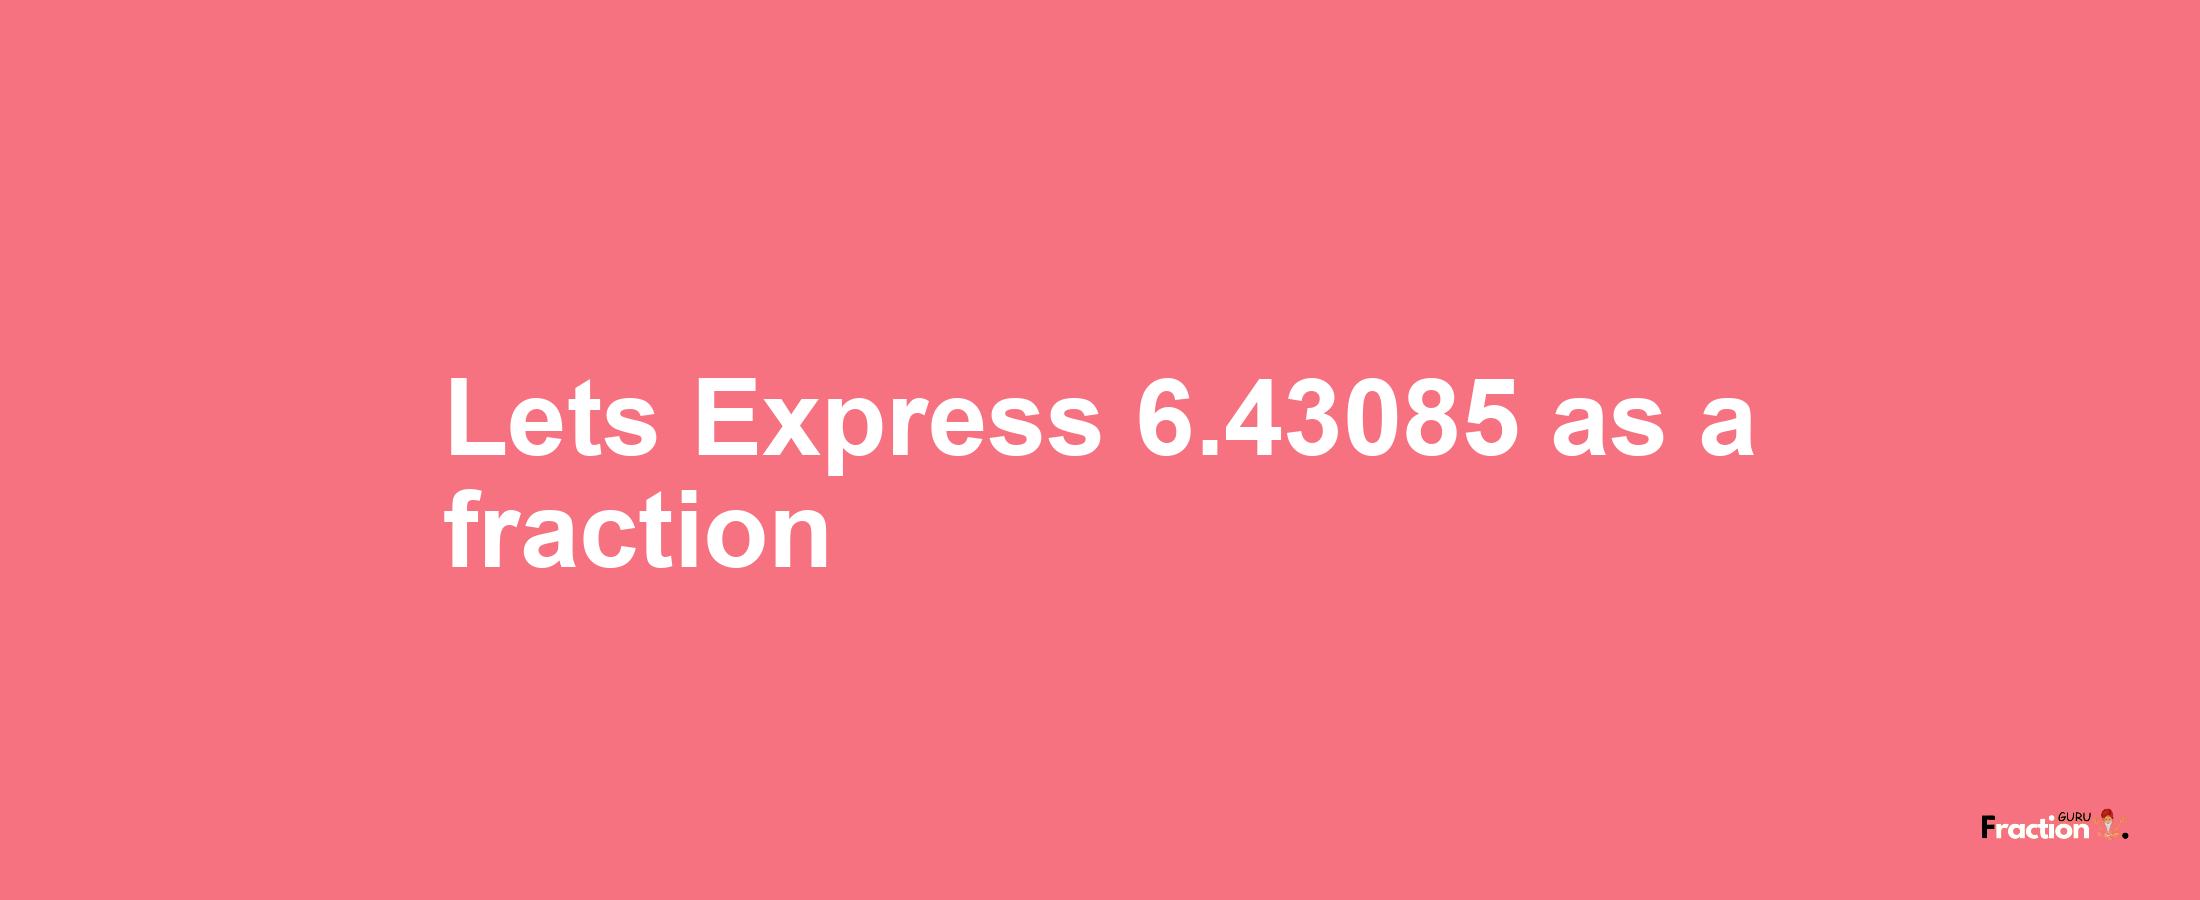 Lets Express 6.43085 as afraction